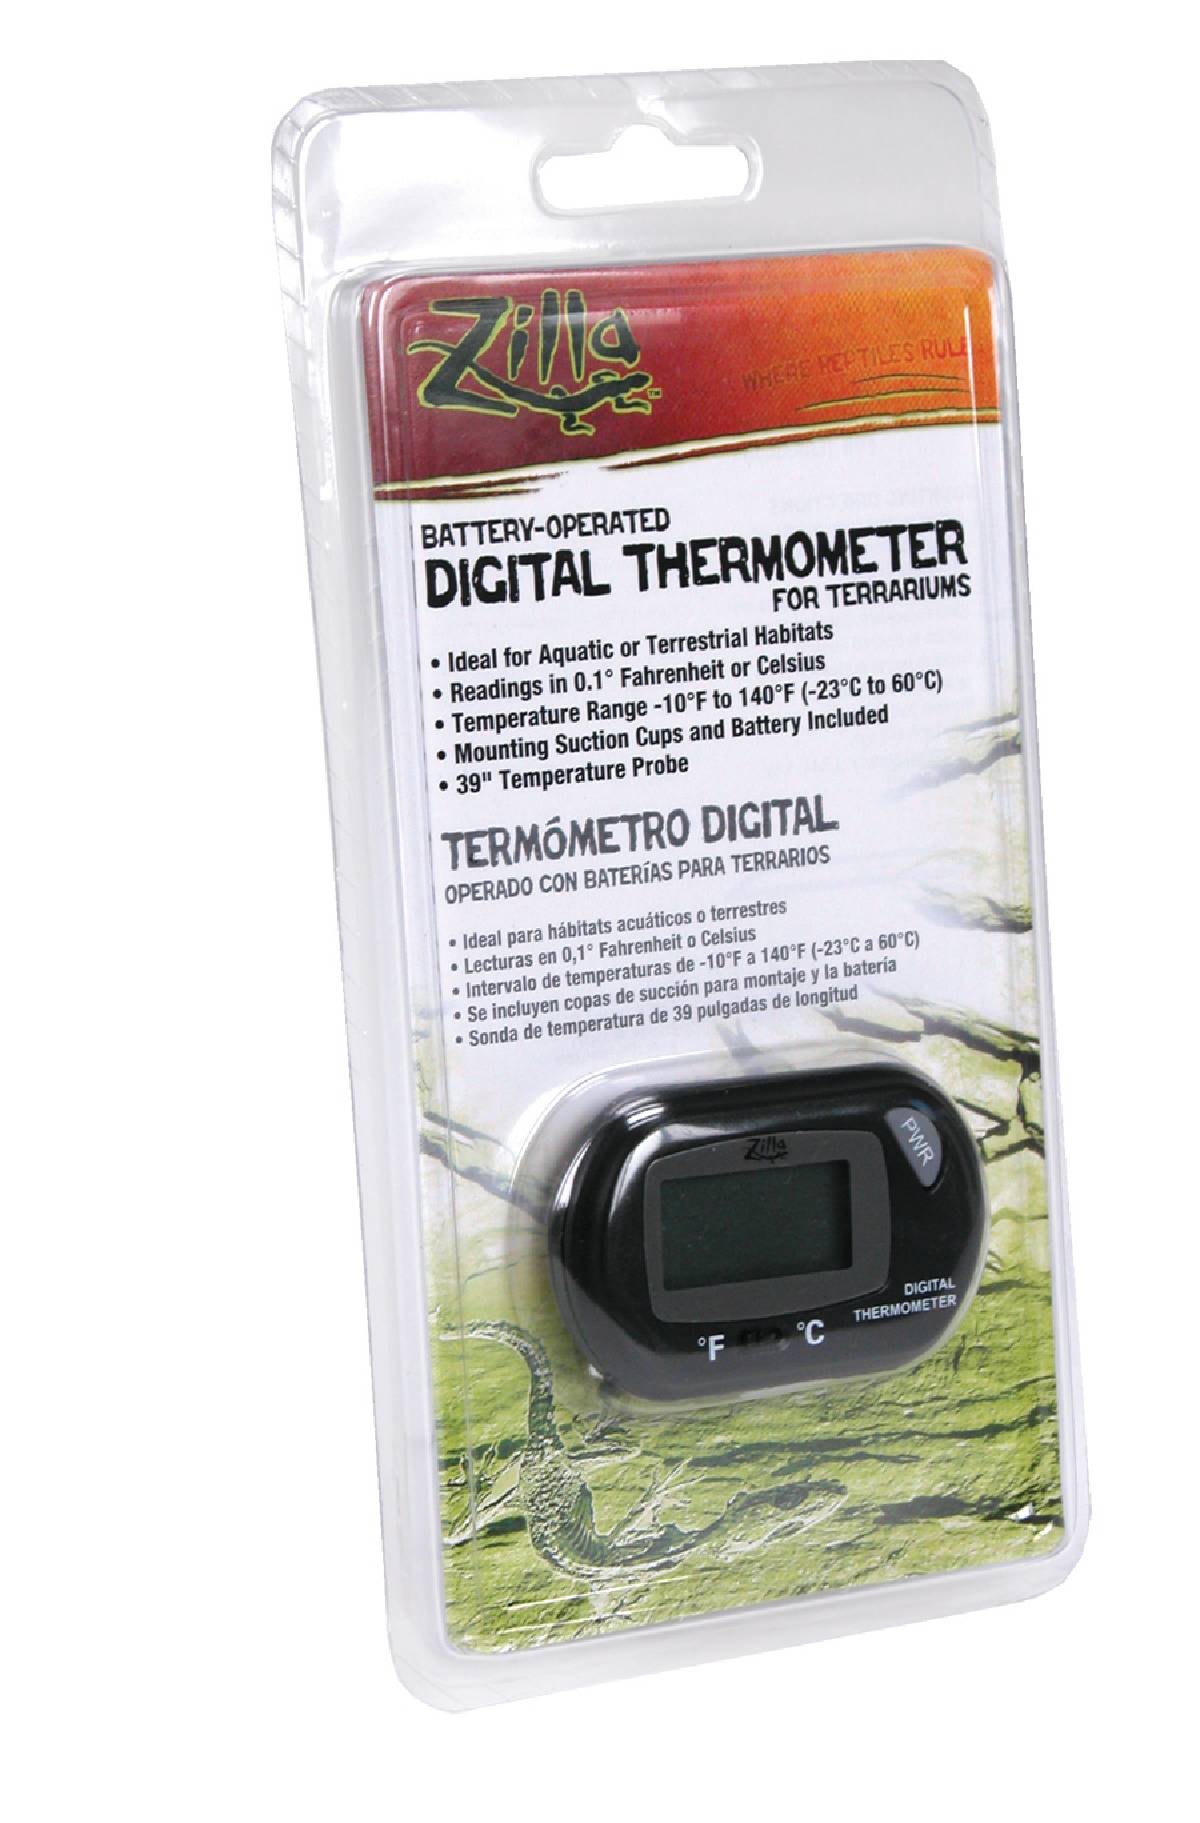 Zilla Reptile Battery Operated Digital Thermometer for Terrariums